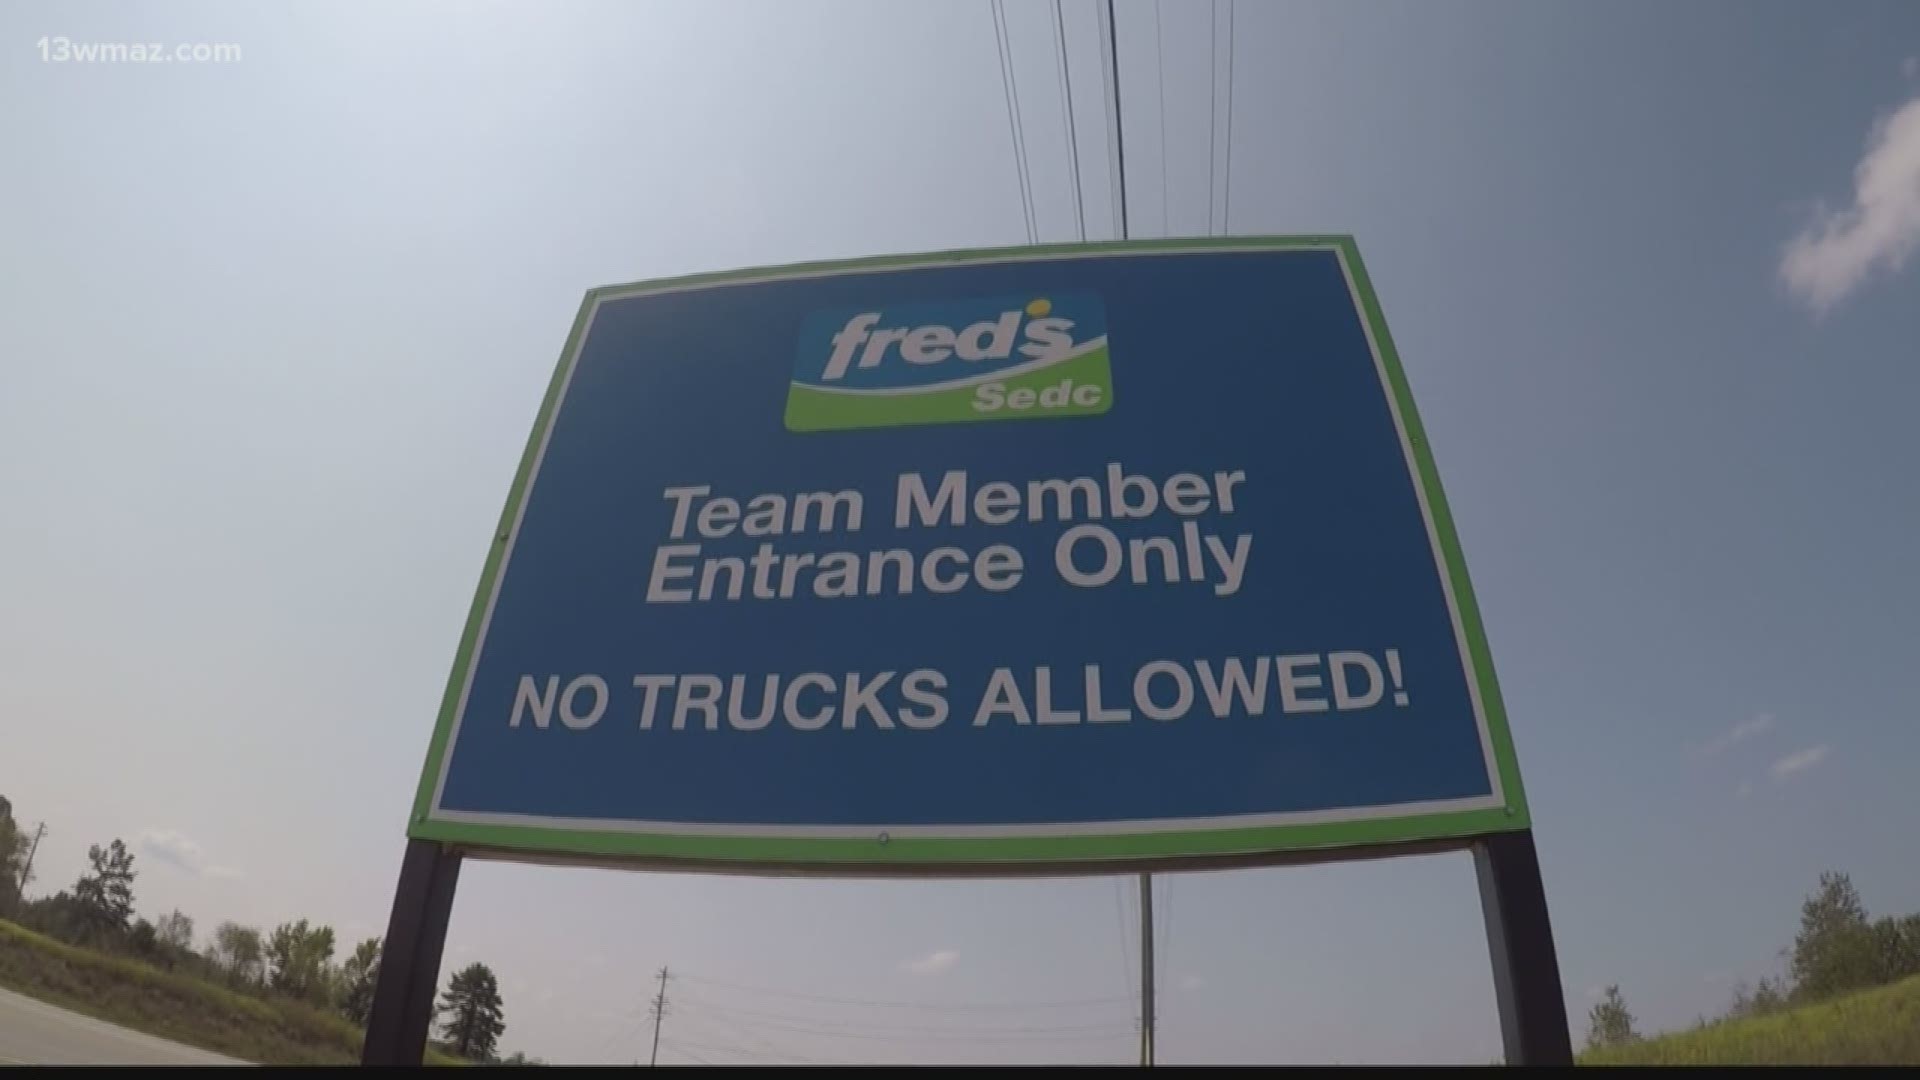 On Monday, the discount store Fred's filed for bankruptcy, planning to close all their stores. As stores around central Georgia close their doors, so will the Fred's distribution center in Dublin.